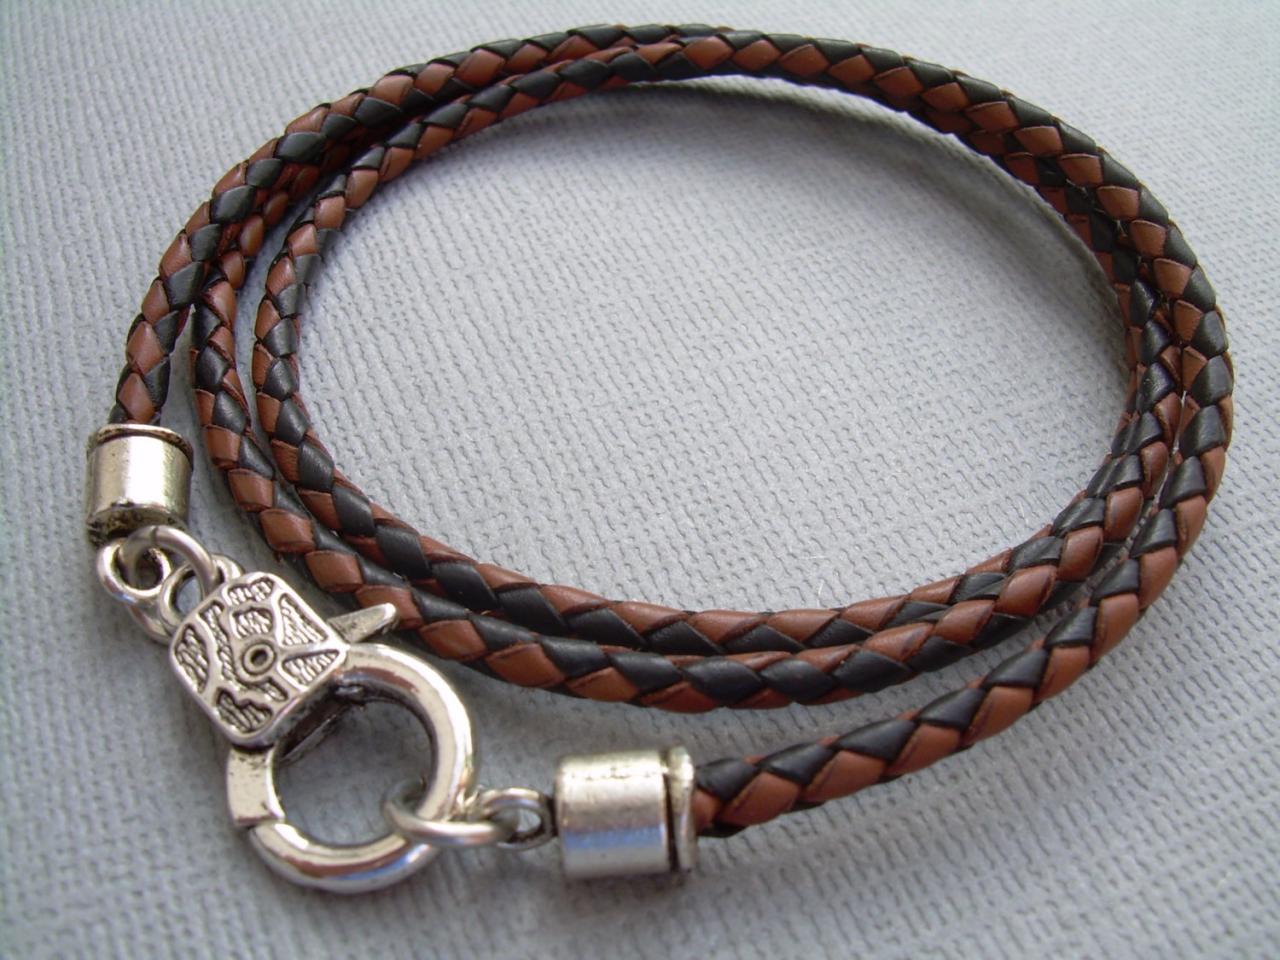 Triple Wrap Braided Leather Bracelet With Lobster Clasp, Mens Bracelet, Mens Jewelry, Mens Gift, Leather Bracelet